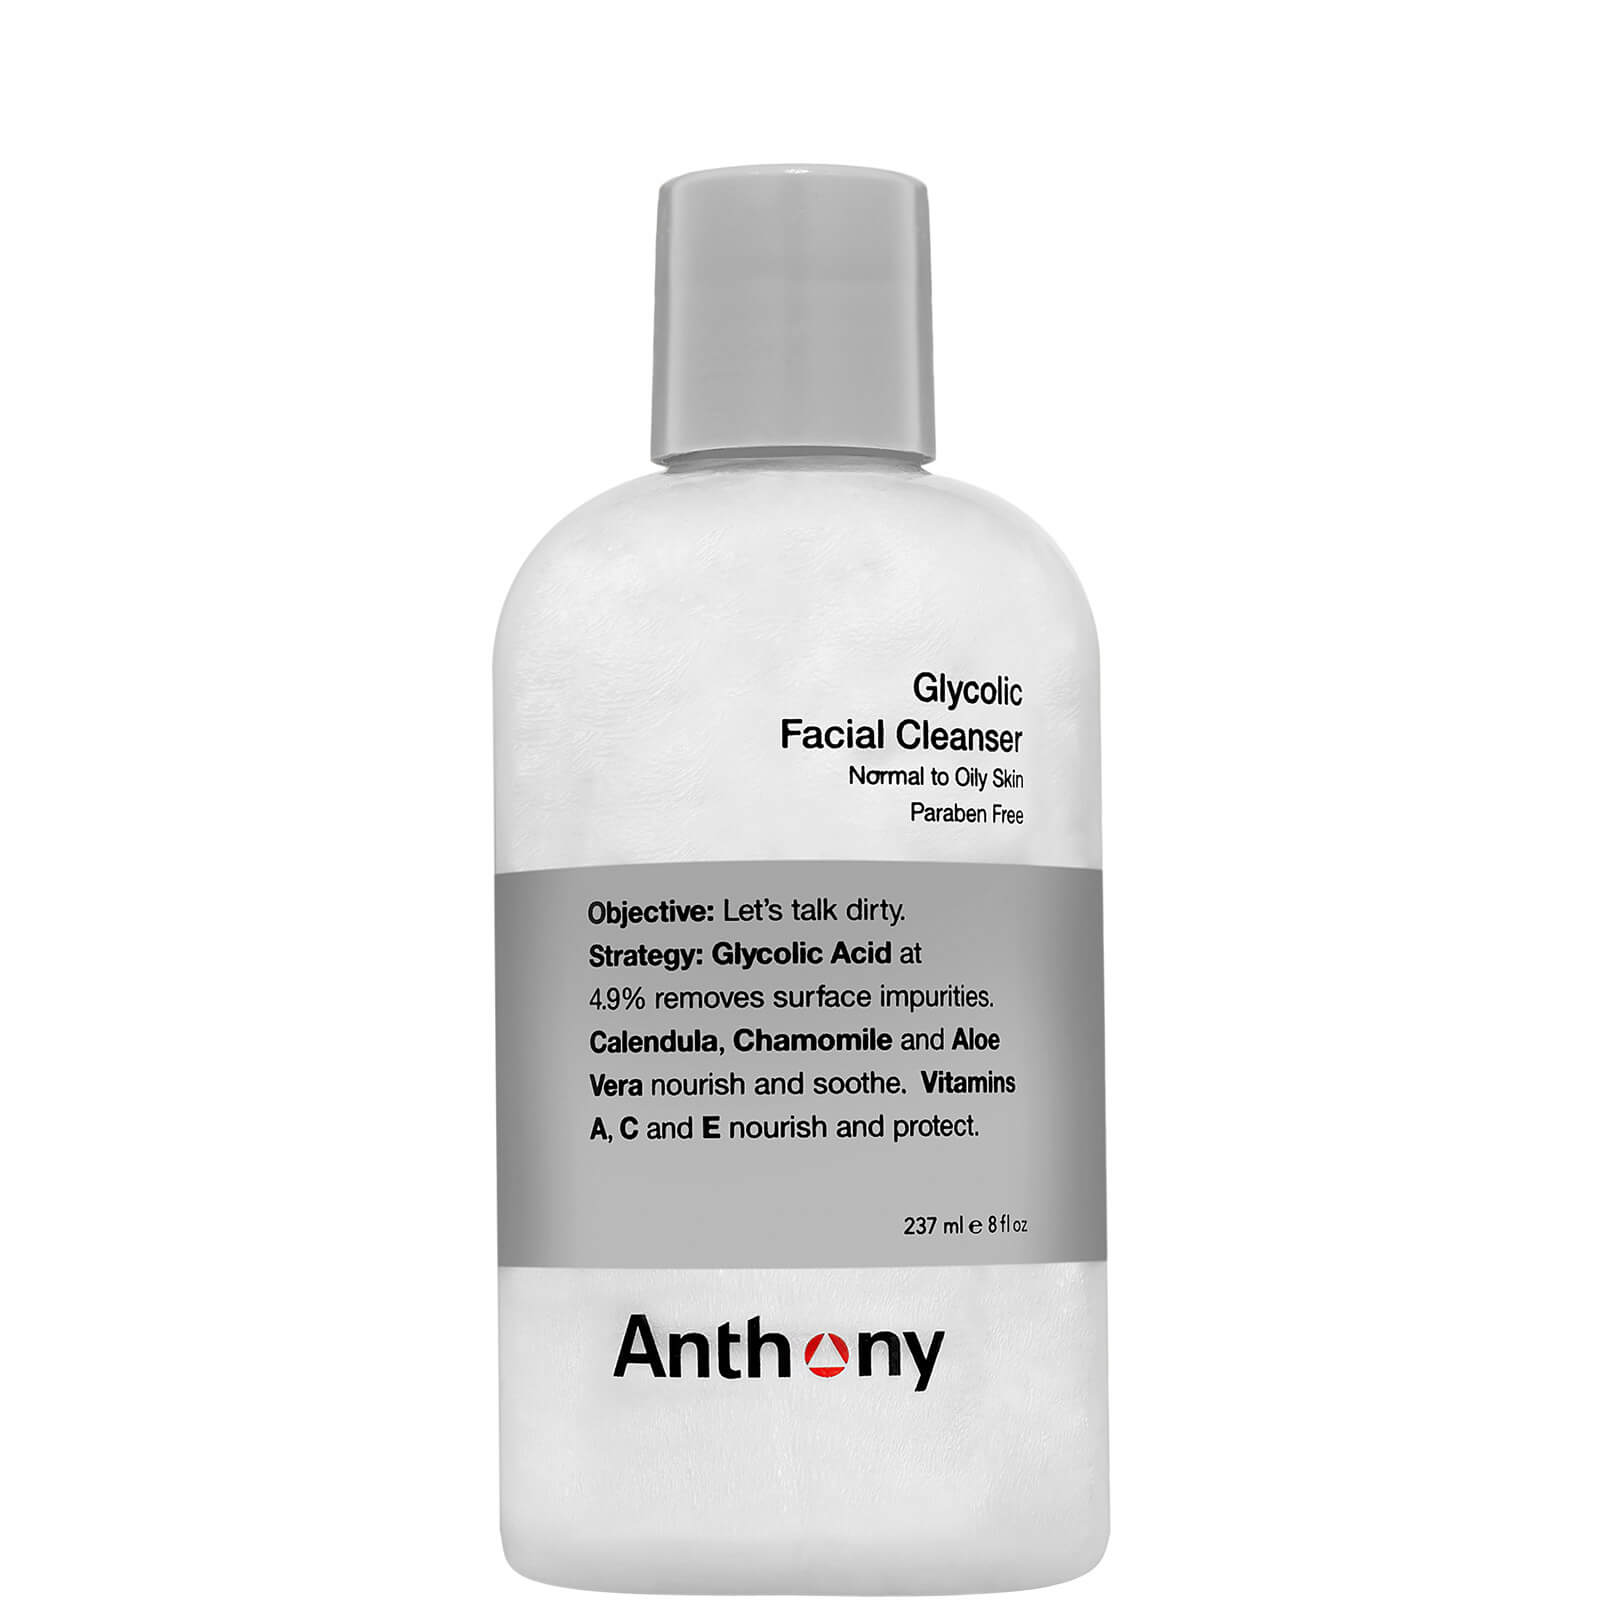 Image of Anthony Glycolic Facial Cleanser 237ml